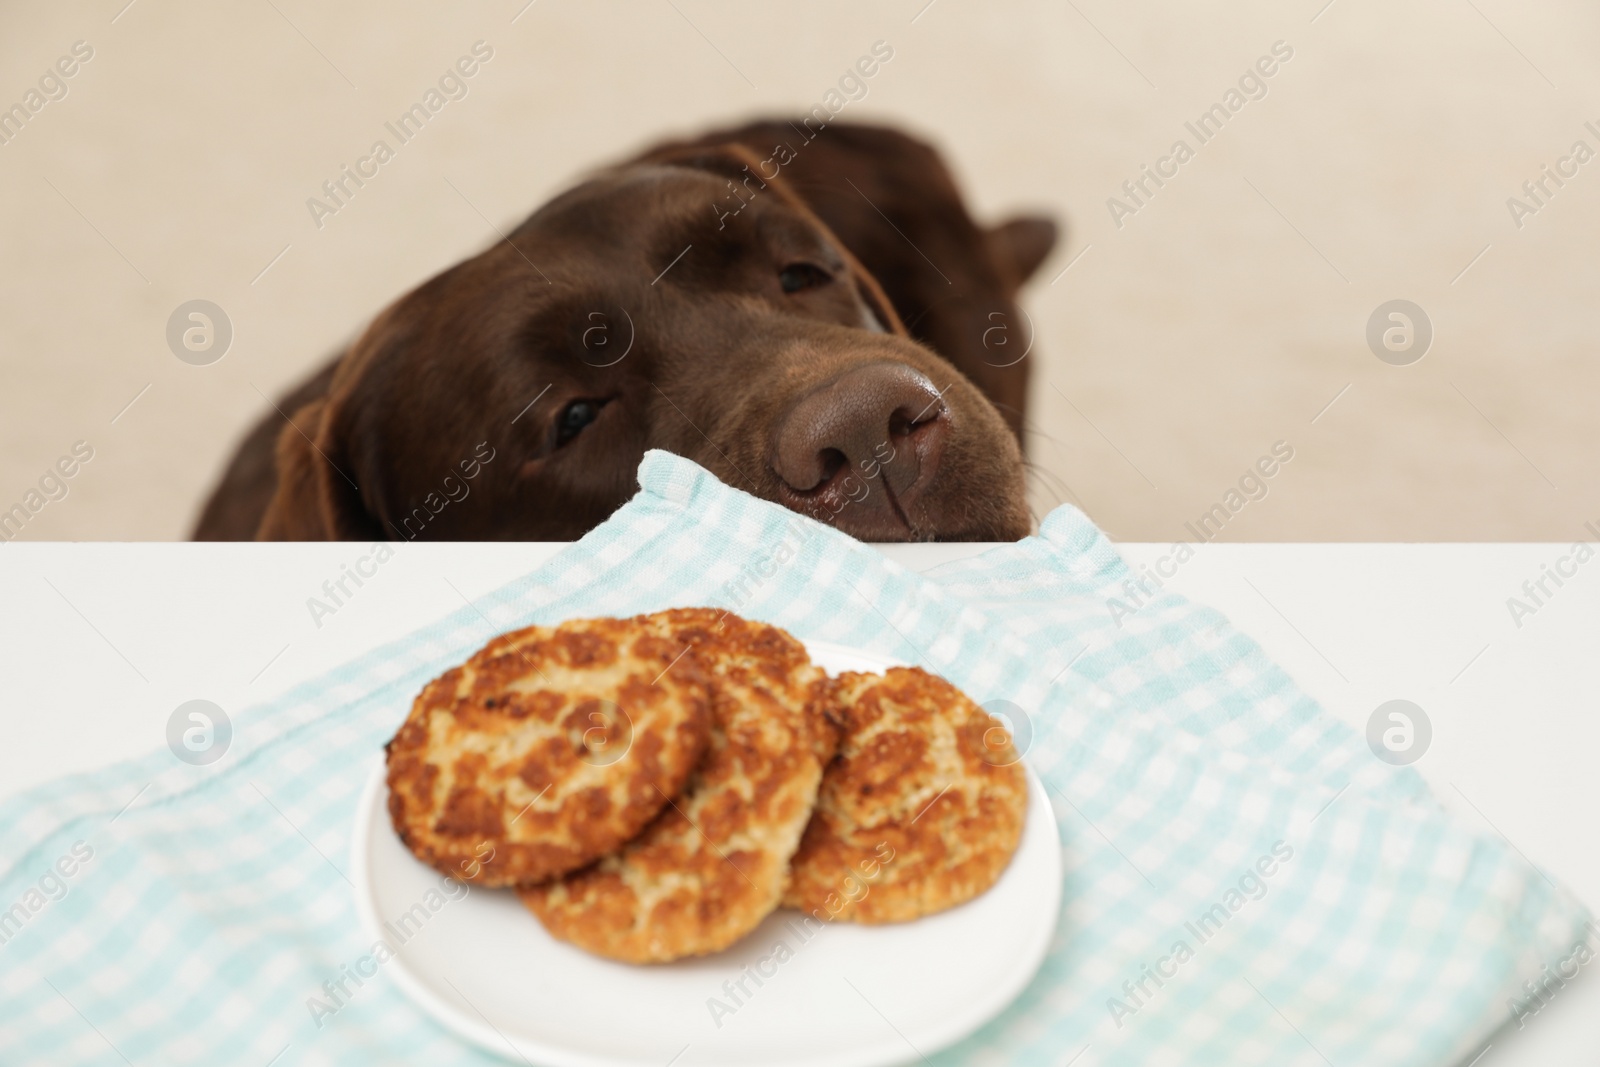 Photo of Chocolate labrador retriever at table with plate of cookies indoors